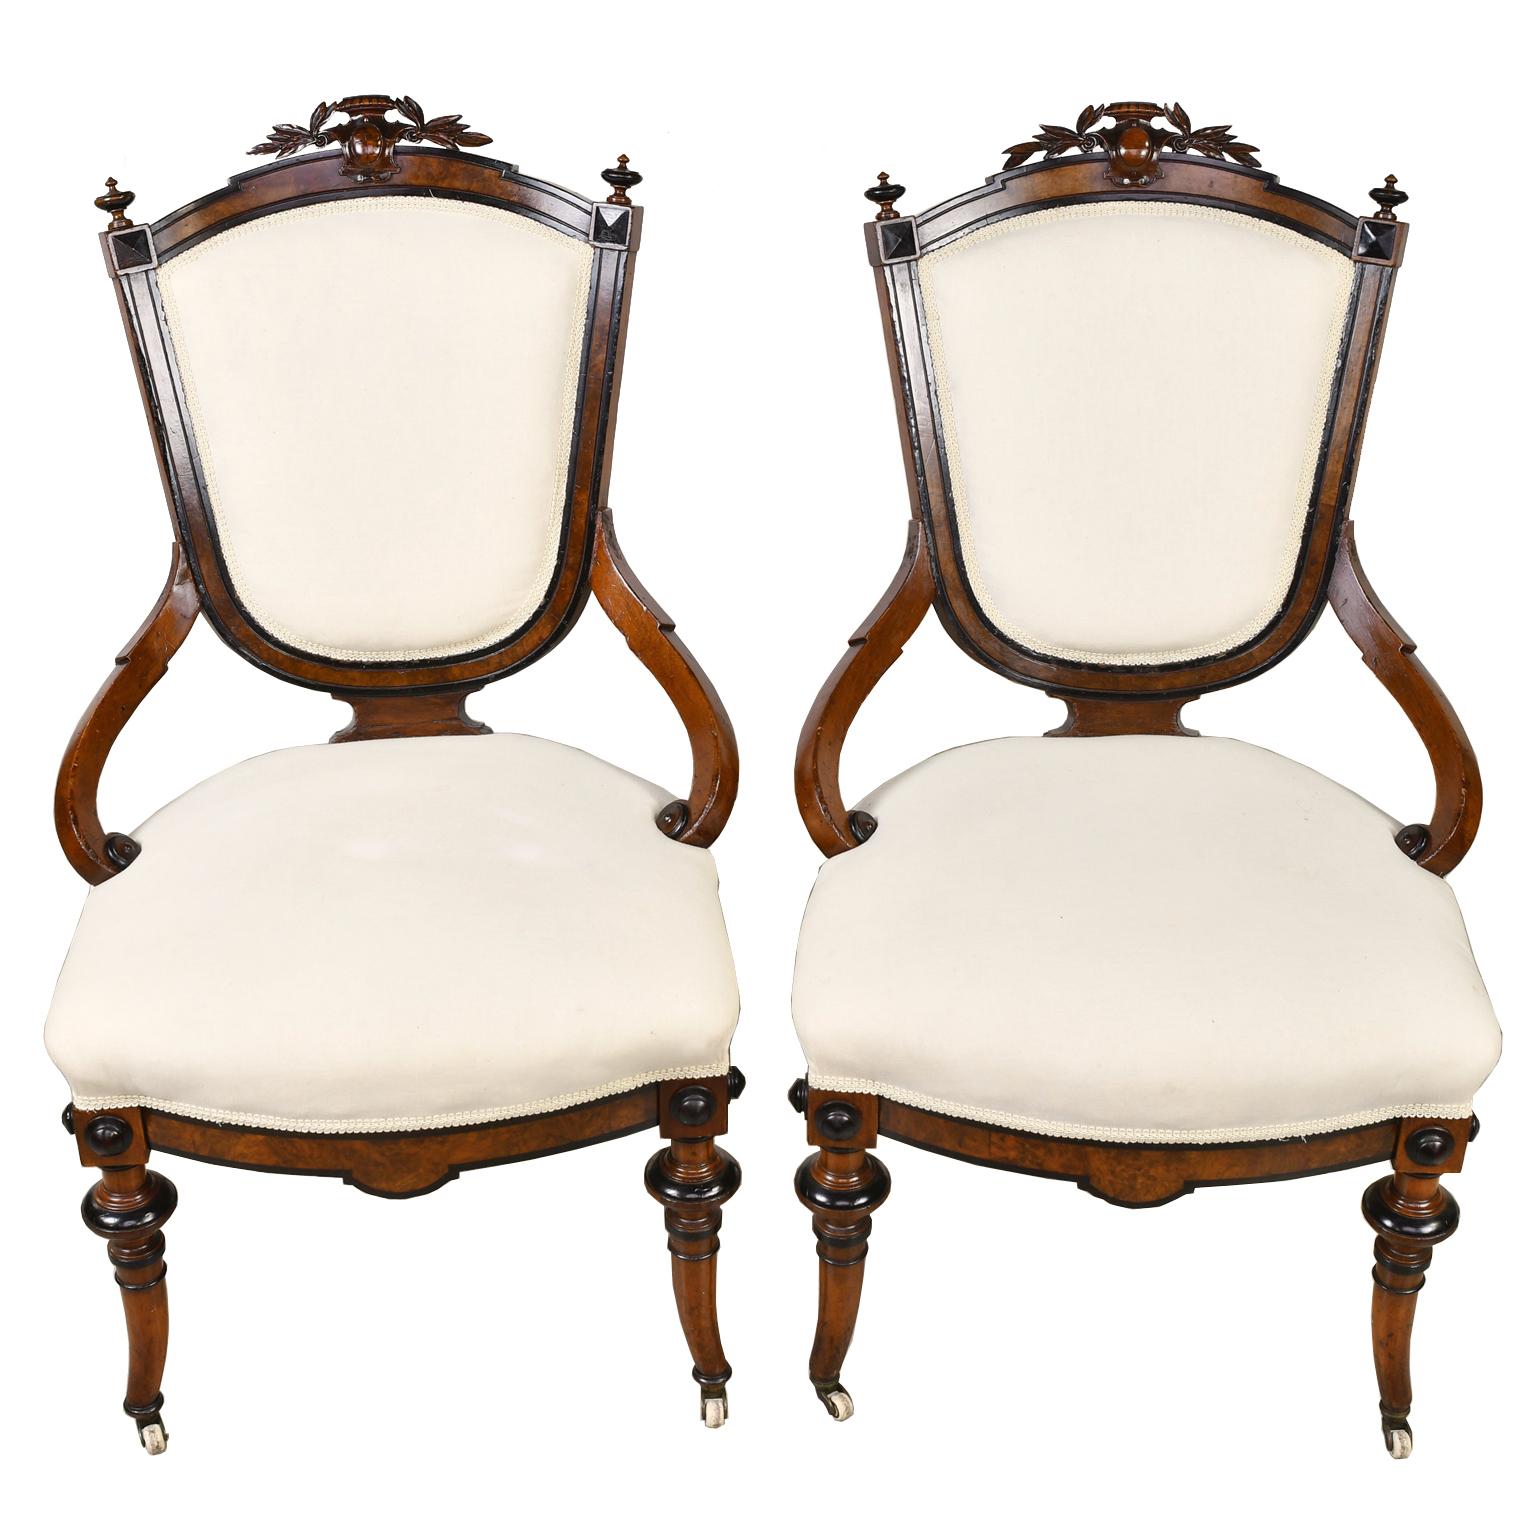 A beautiful pair of Napoleon III armchairs with walnut frame with burled walnut and ebonized details. Shield-back has carved laurel leaves with a cartouche over the crest rail with finials on the corners. Chairs have an upholstered back and seat,